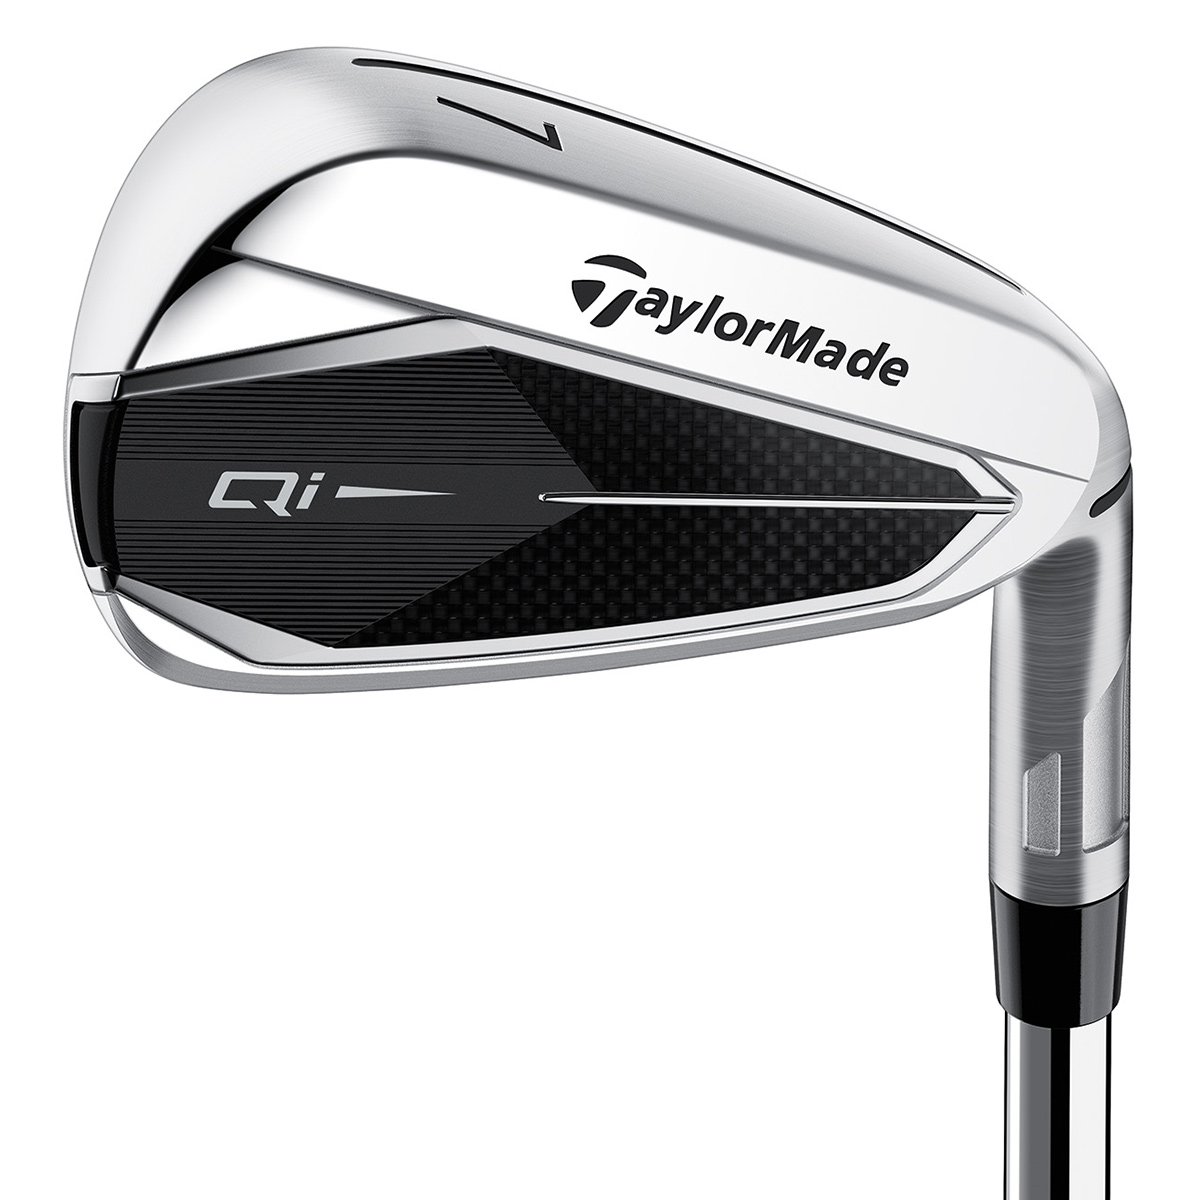 https://www.americangolf.co.uk/on/demandware.static/-/Sites-master-catalog/default/dw09d6043a/images-square/zoom/431993-TaylorMade-Qi10-Steel-Golf-Irons-1.jpg